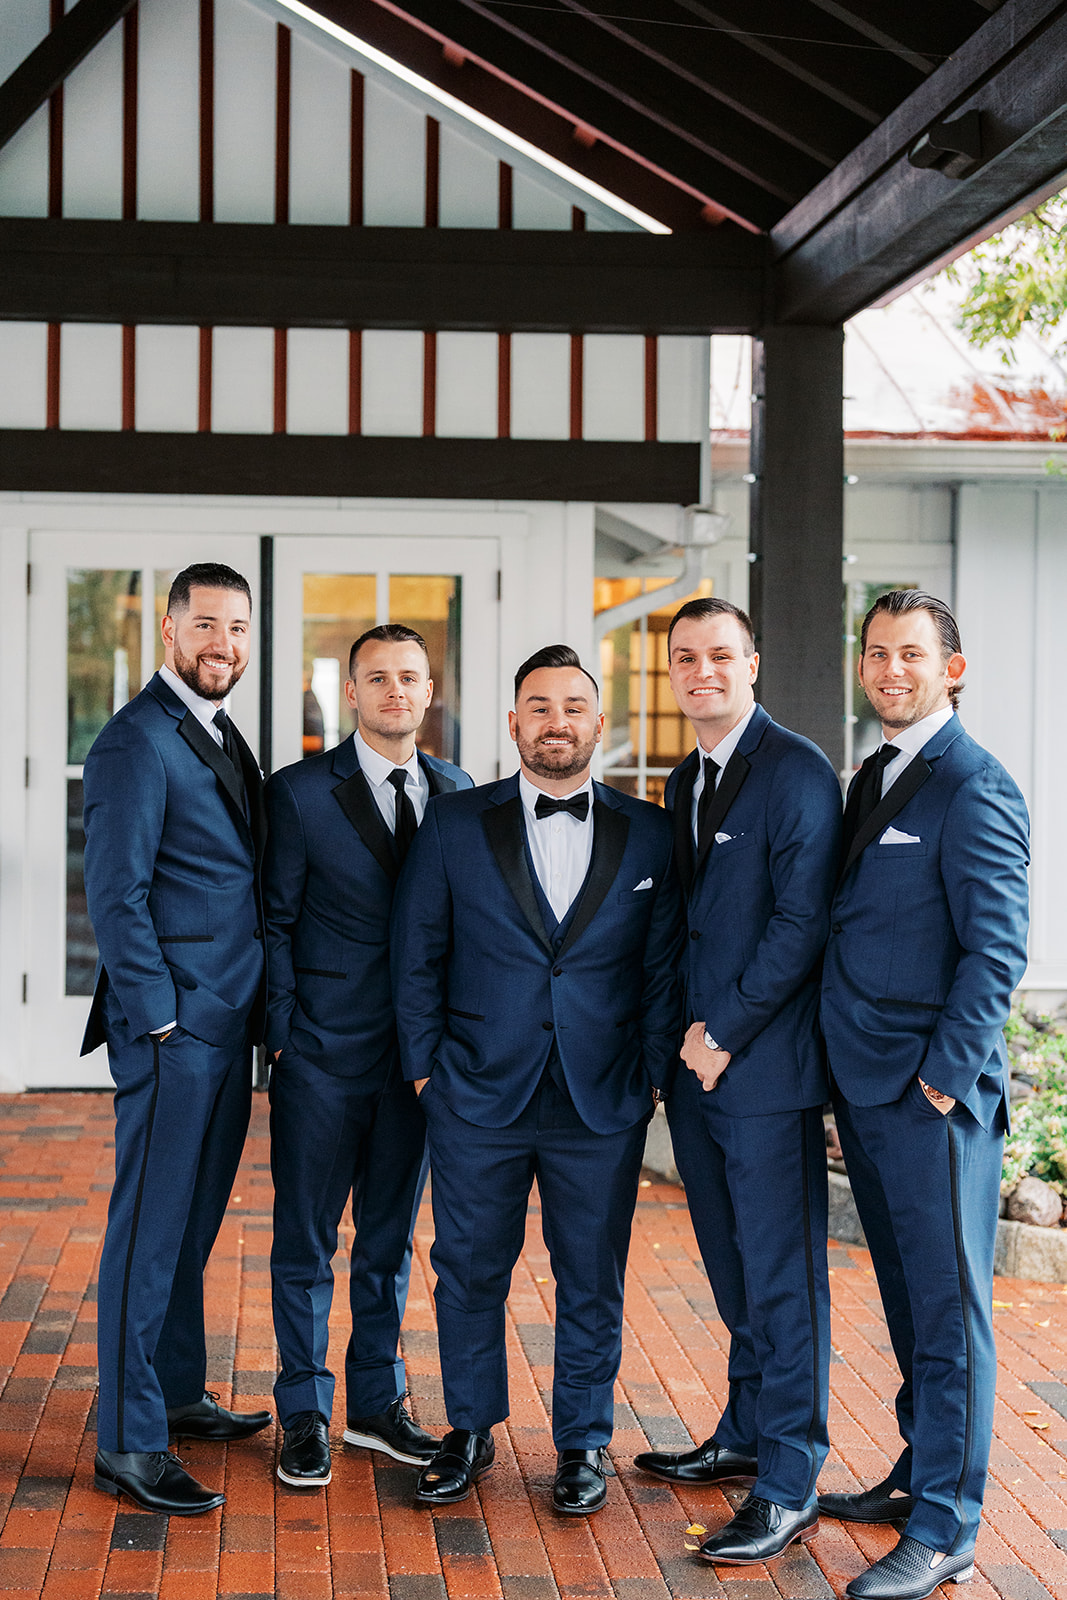 A groom stands with hands in his pockets in a blue suit with his four groomsmen under a covered patio